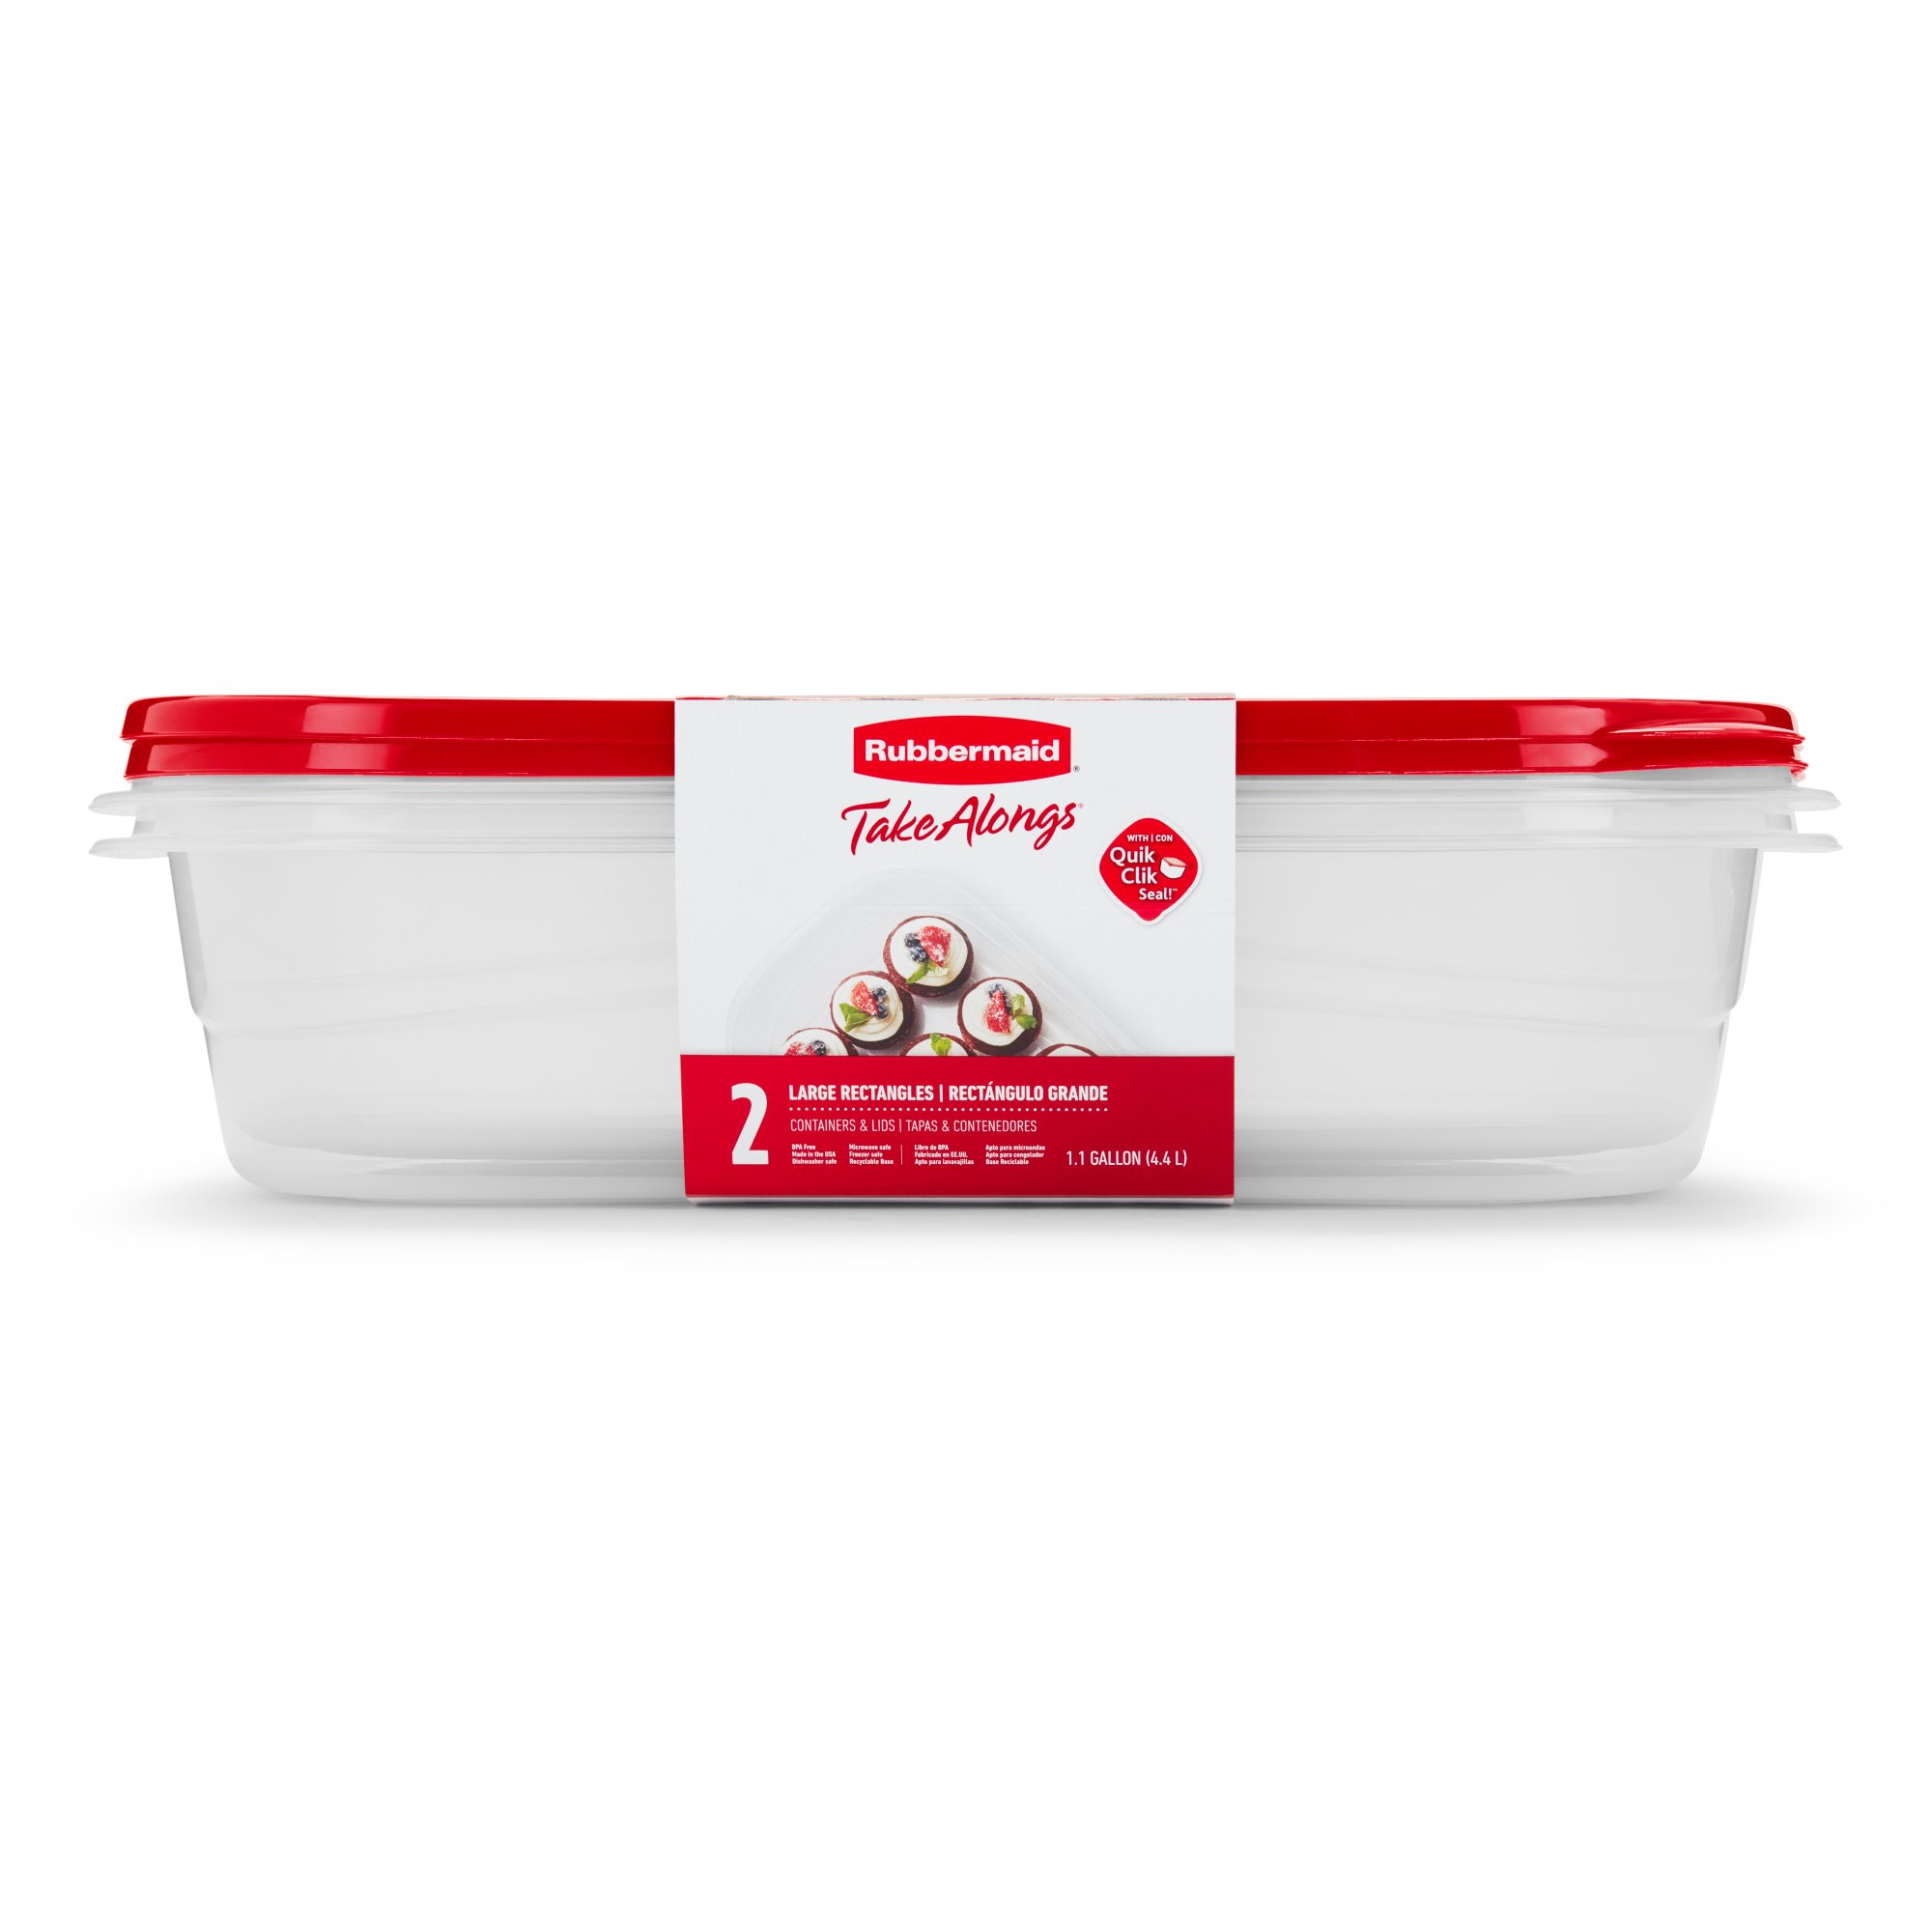 https://s7d9.scene7.com/is/image/NewellRubbermaid/2086752-rubbermaid-food-storage-takealongs-OS-1.0G-3.7L-TKA-RECT-2PK-RUBY-front-of-pack-straight-on?wid=2000&hei=2000